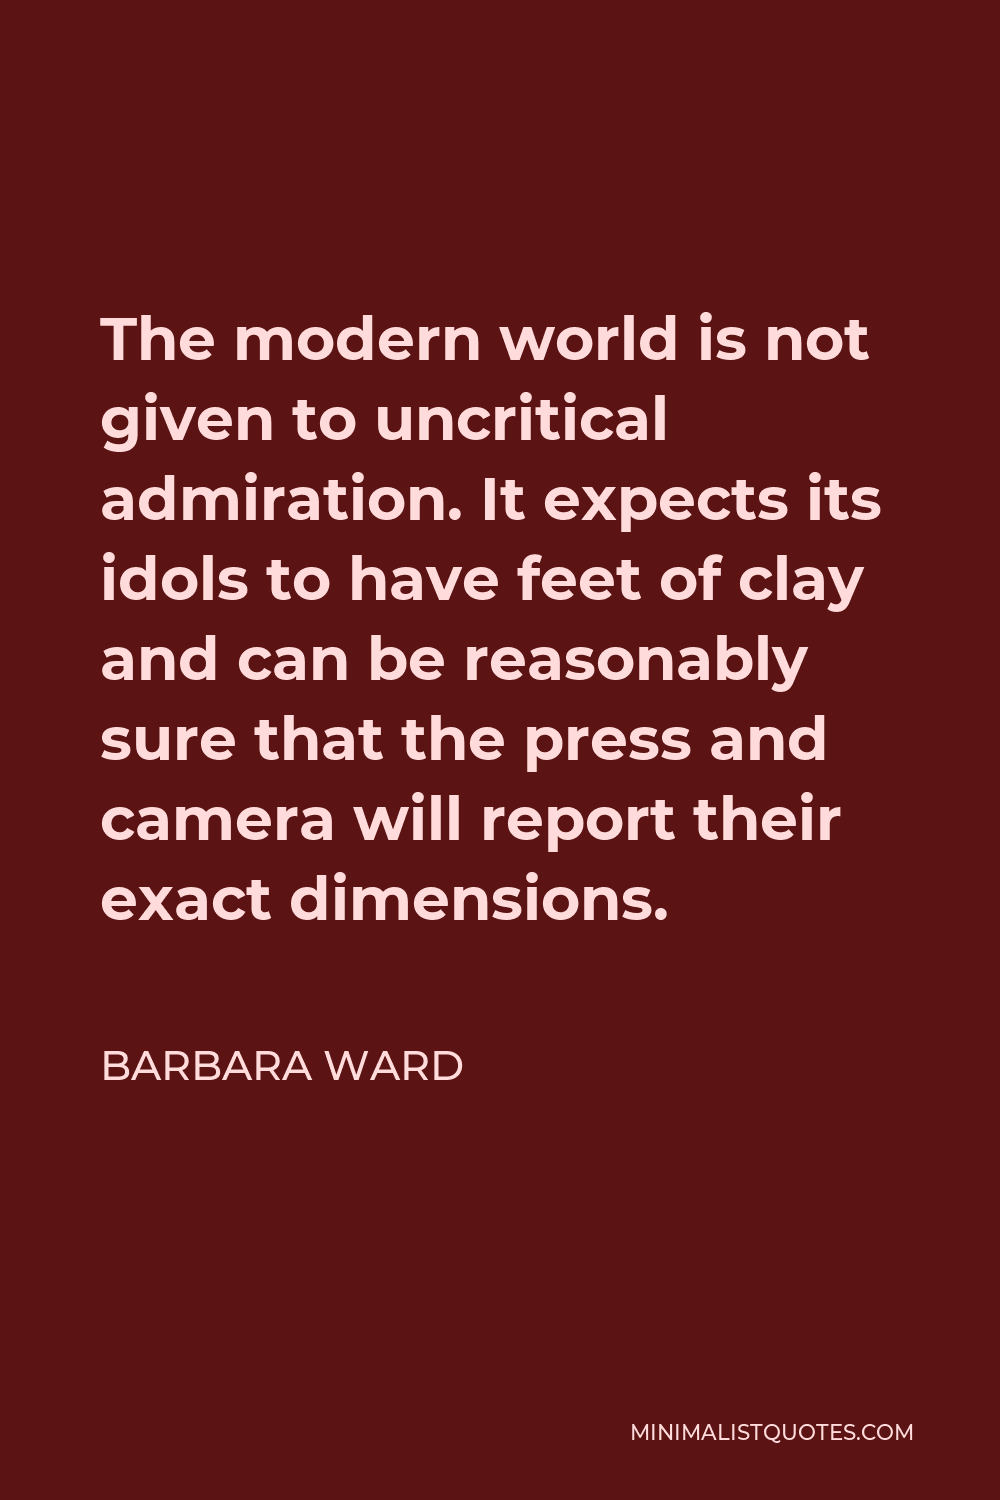 Barbara Ward Quote - The modern world is not given to uncritical admiration. It expects its idols to have feet of clay and can be reasonably sure that the press and camera will report their exact dimensions.